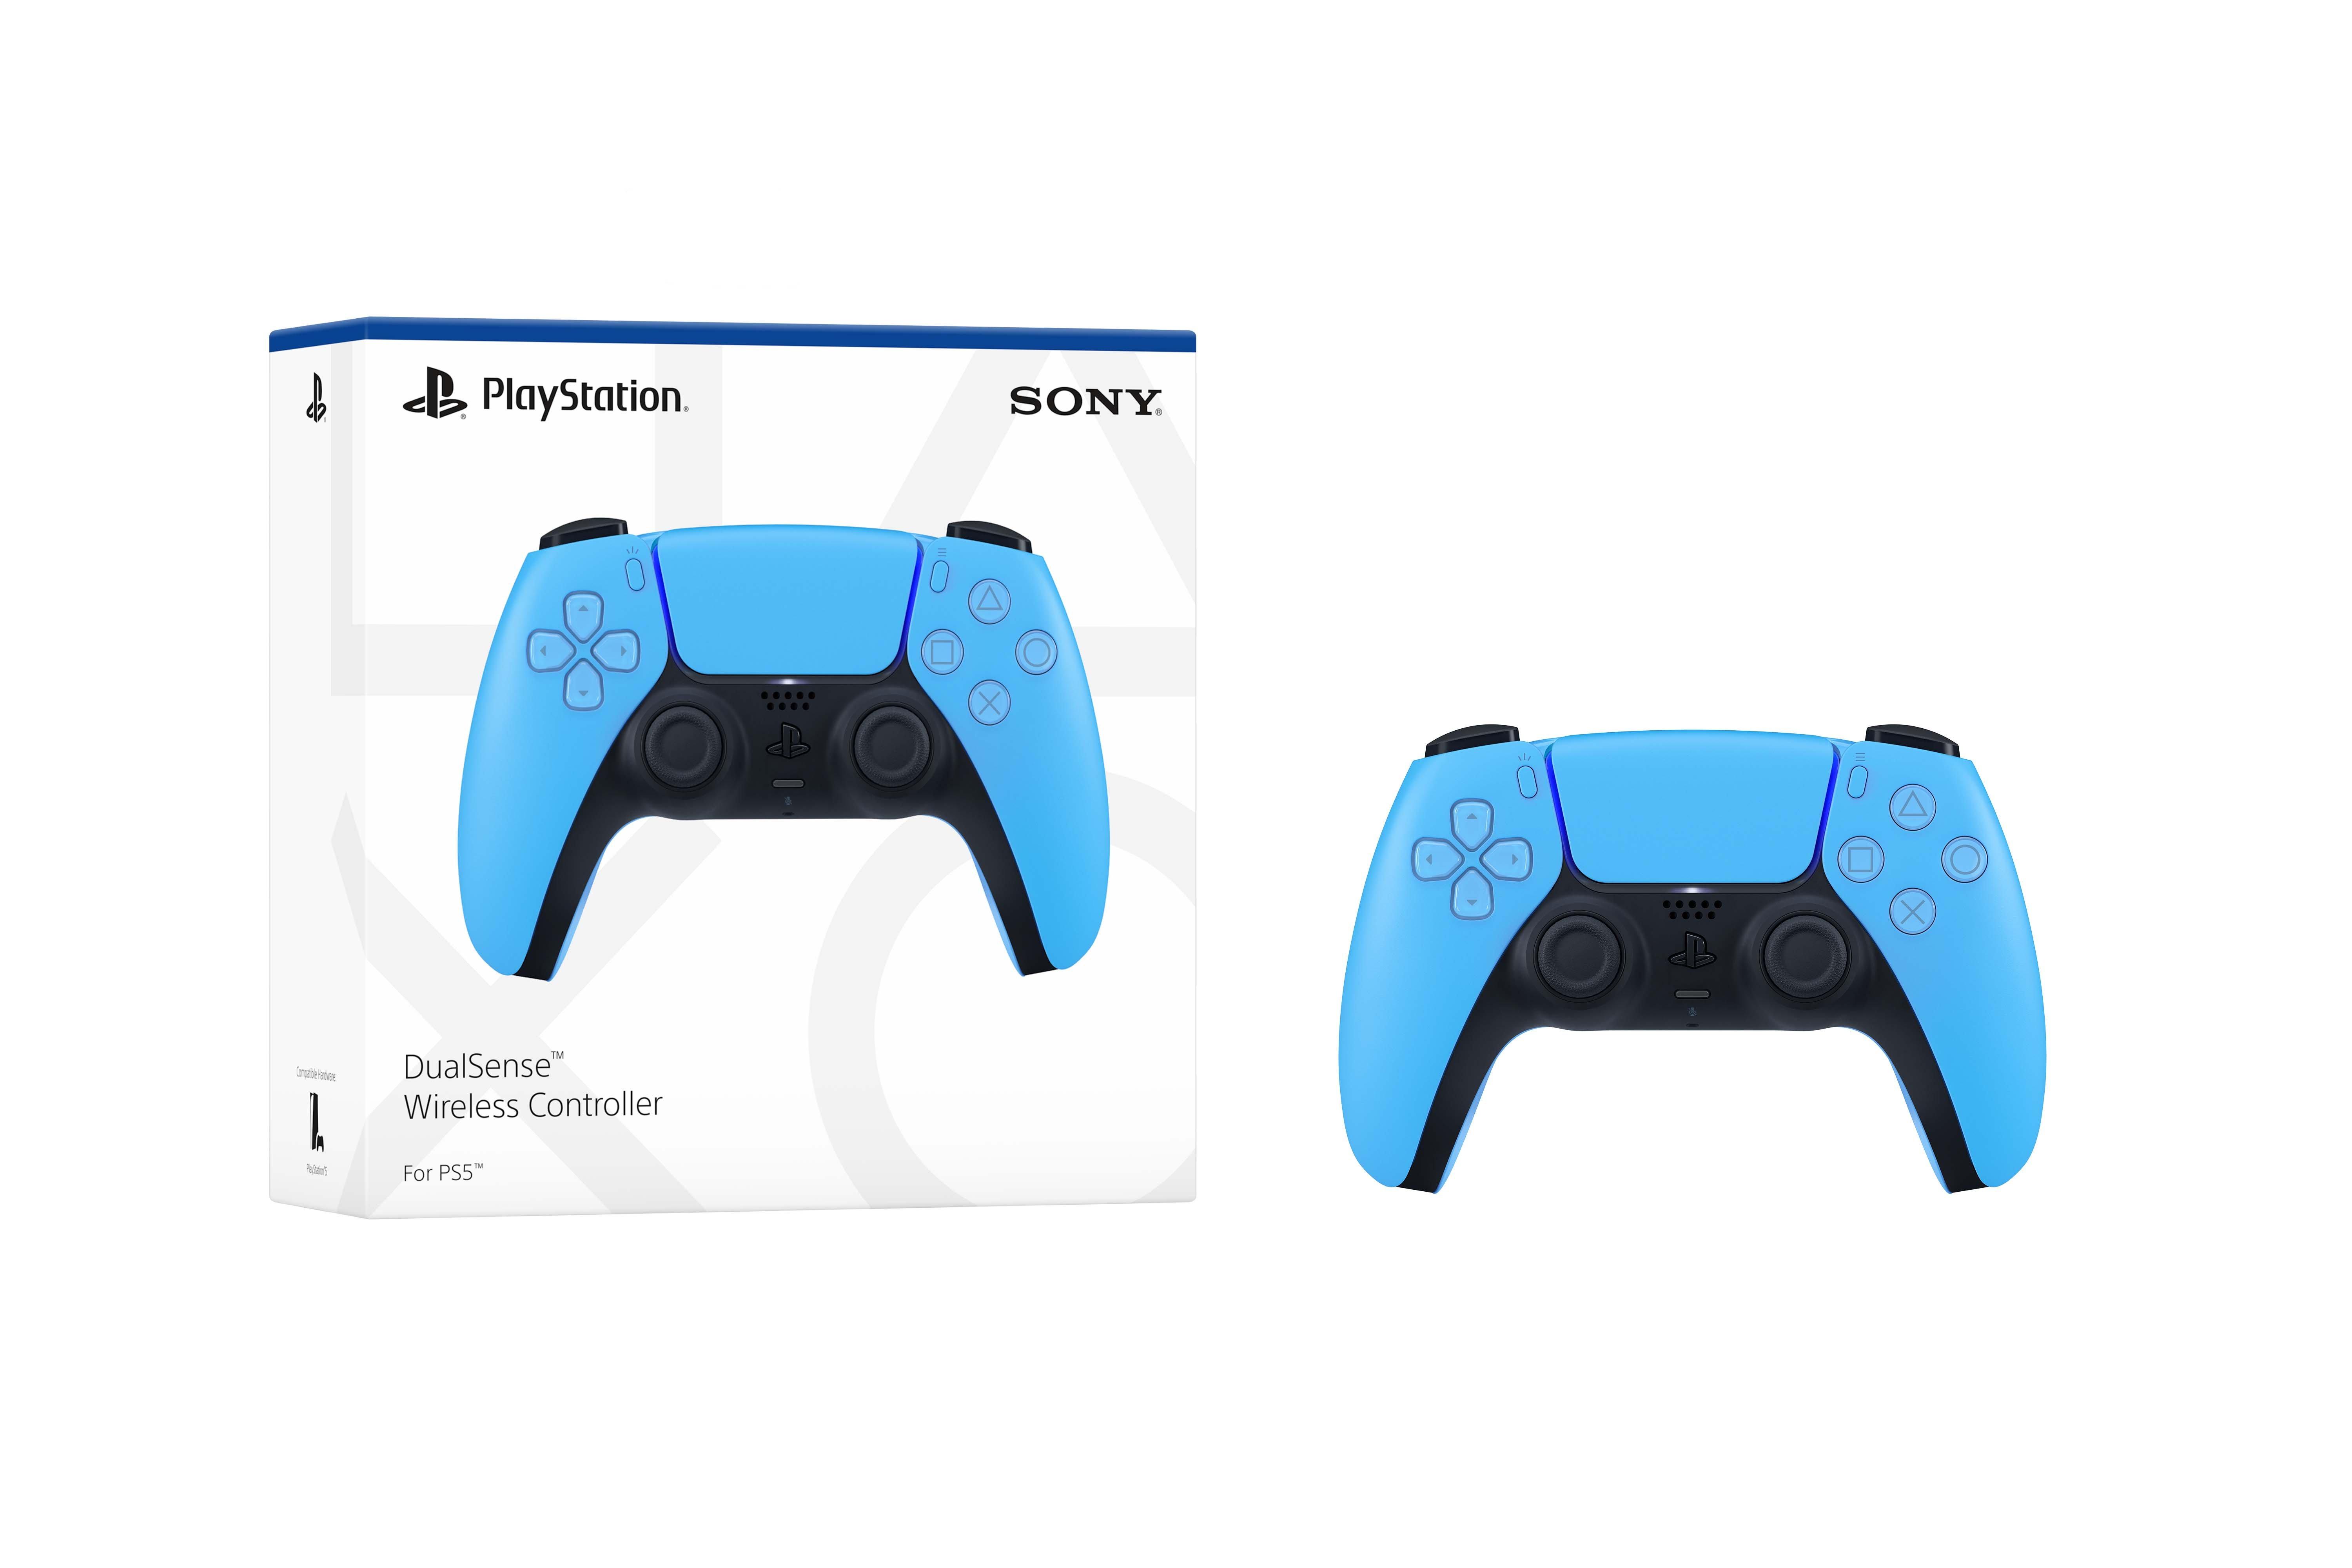 Sony DualSense Wireless Controller for PlayStation 5 Starlight Blue